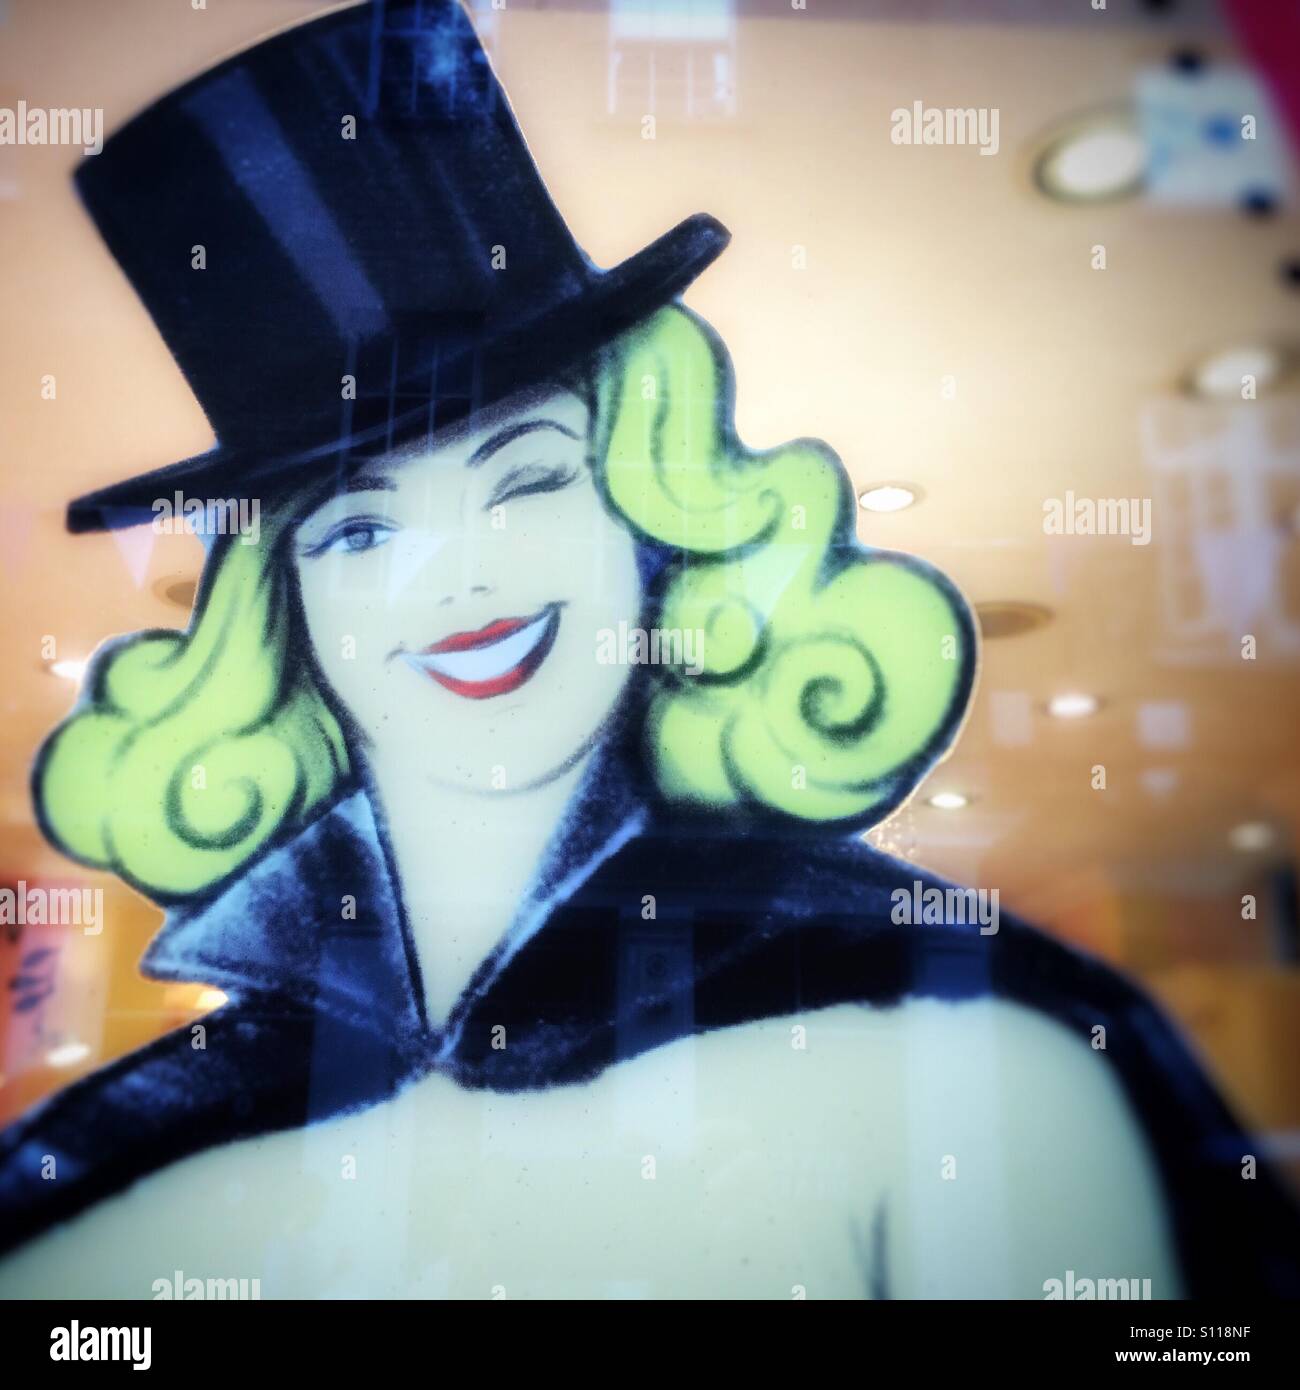 You're swell, blonde in top hat, cartoon style Stock Photo